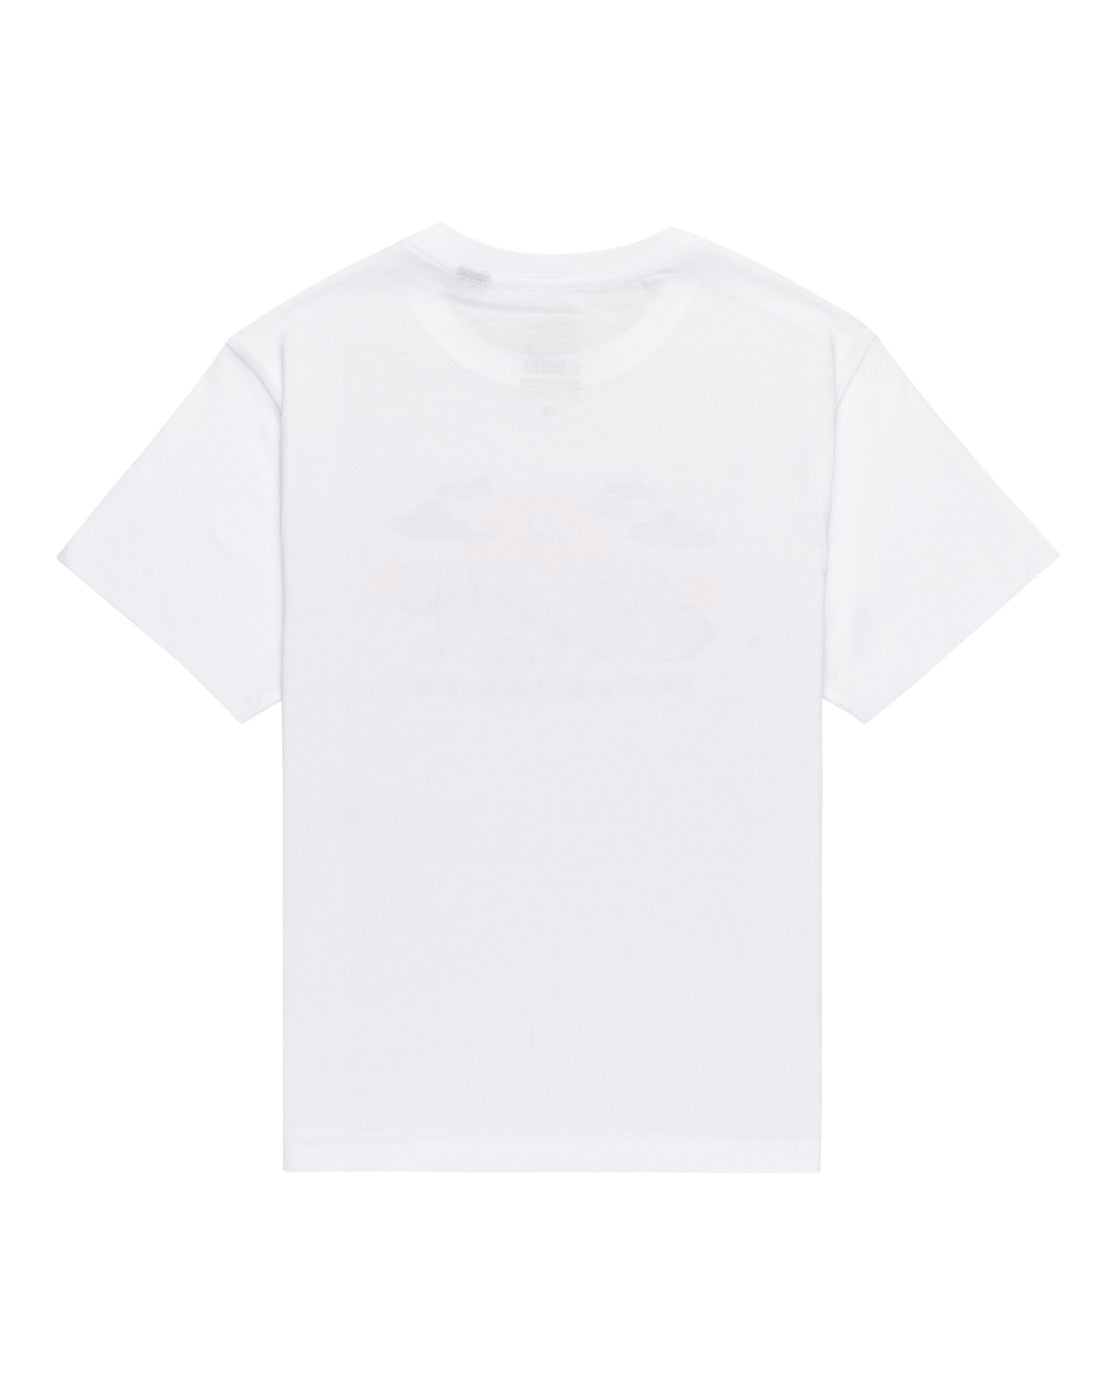 ELEMENT - BUBBLE SUN SS YOUTH TEE - WHITE